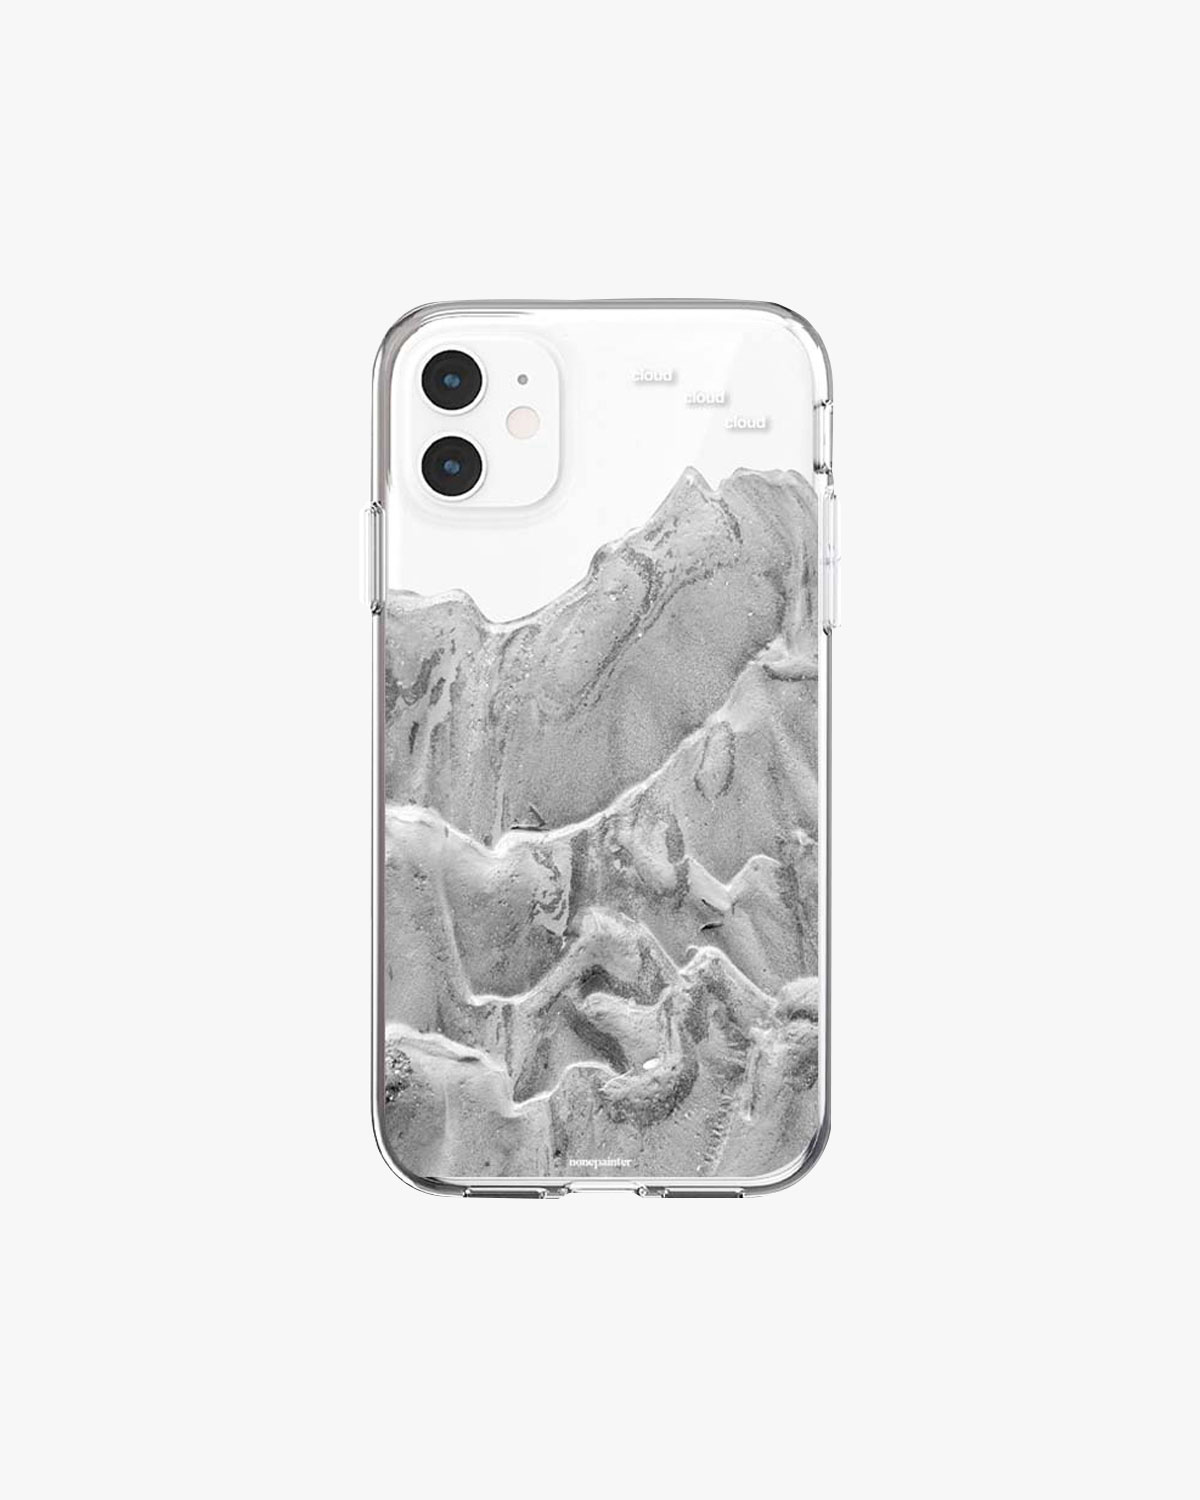 Mud clear jelly case